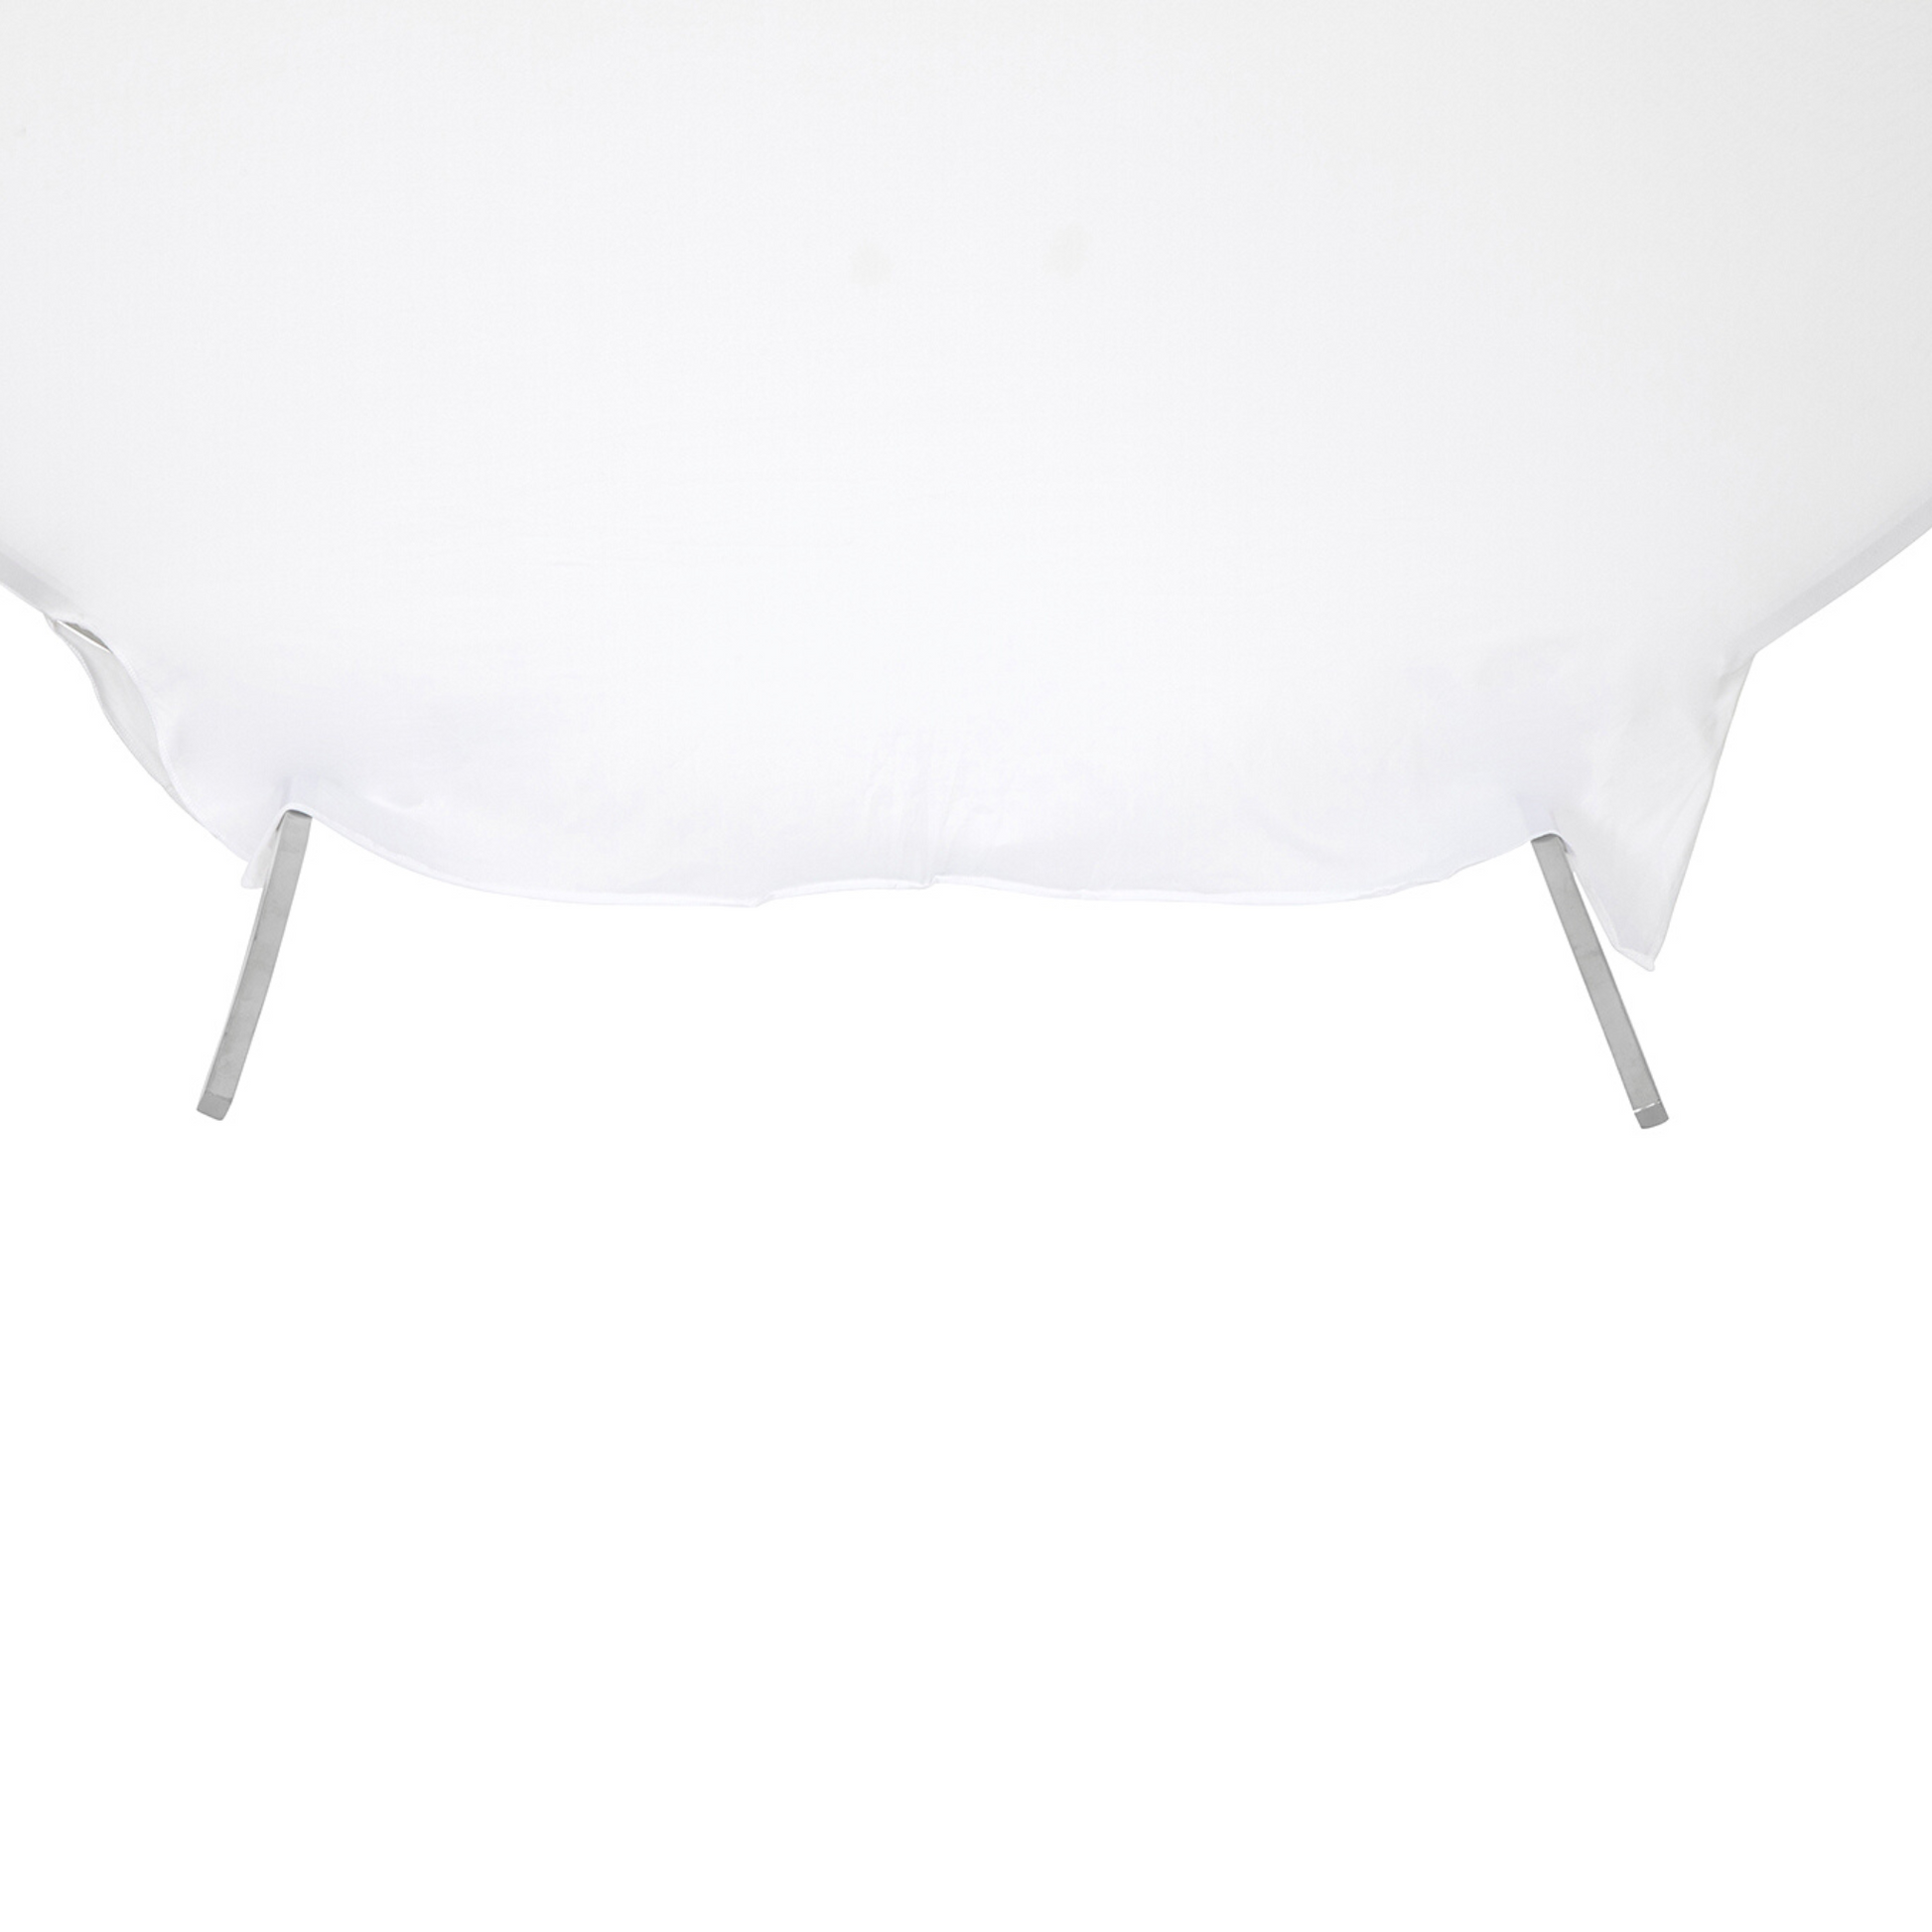 Spandex Arch Cover for Round 7.5 ft Wedding Arch Stand - White